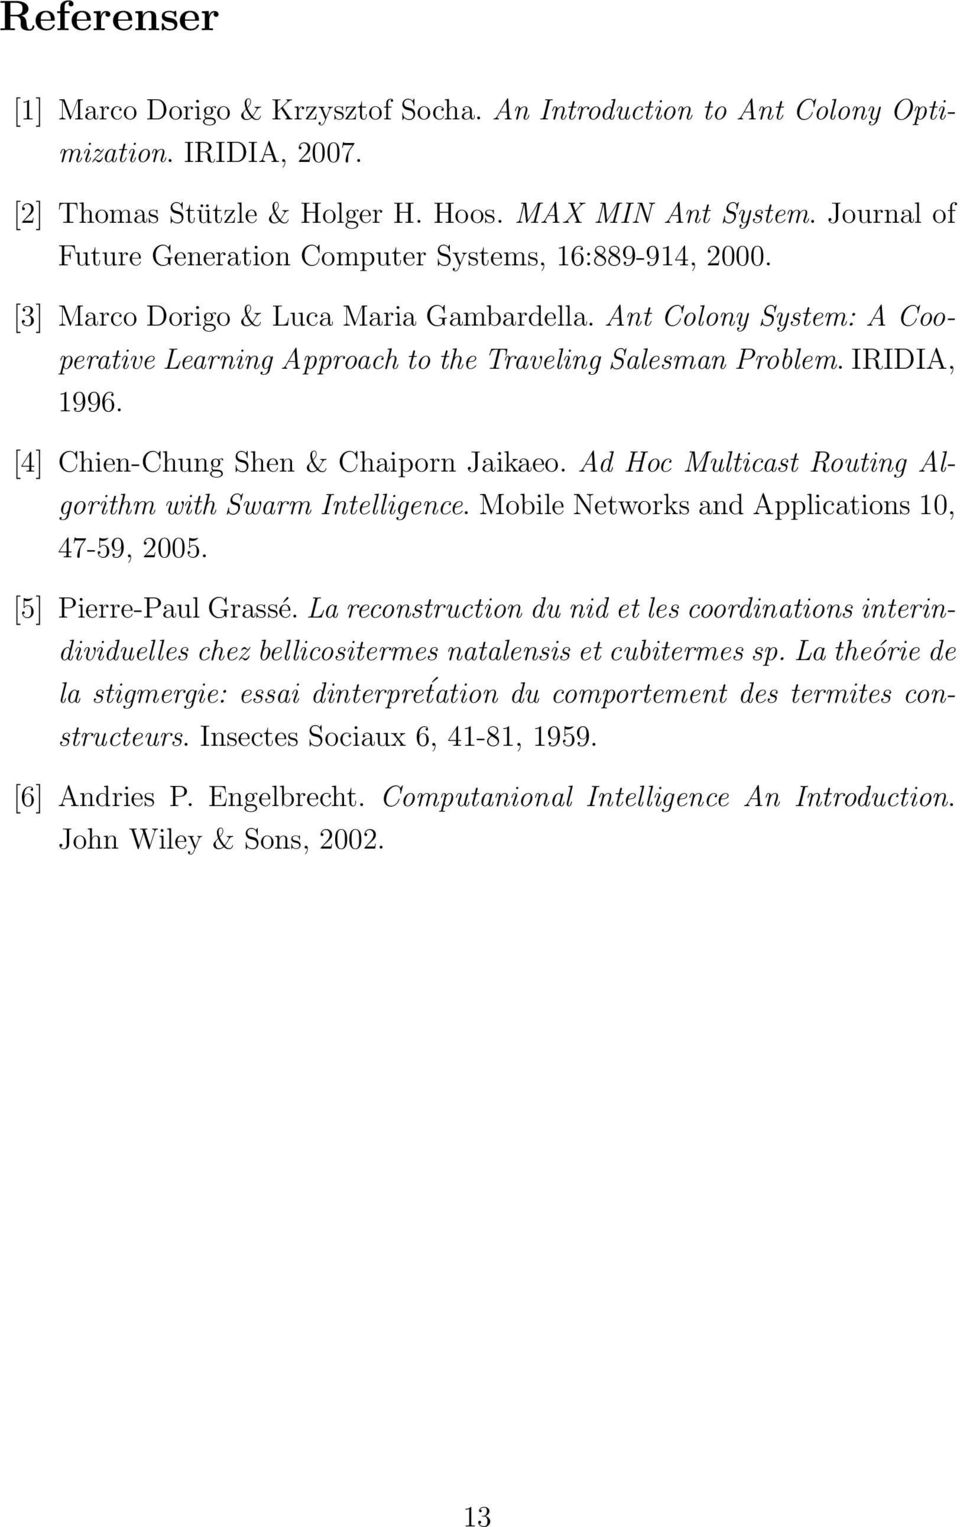 IRIDIA, 1996. [4] Chien-Chung Shen & Chaiporn Jaikaeo. Ad Hoc Multicast Routing Algorithm with Swarm Intelligence. Mobile Networks and Applications 10, 47-59, 2005. [5] Pierre-Paul Grassé.